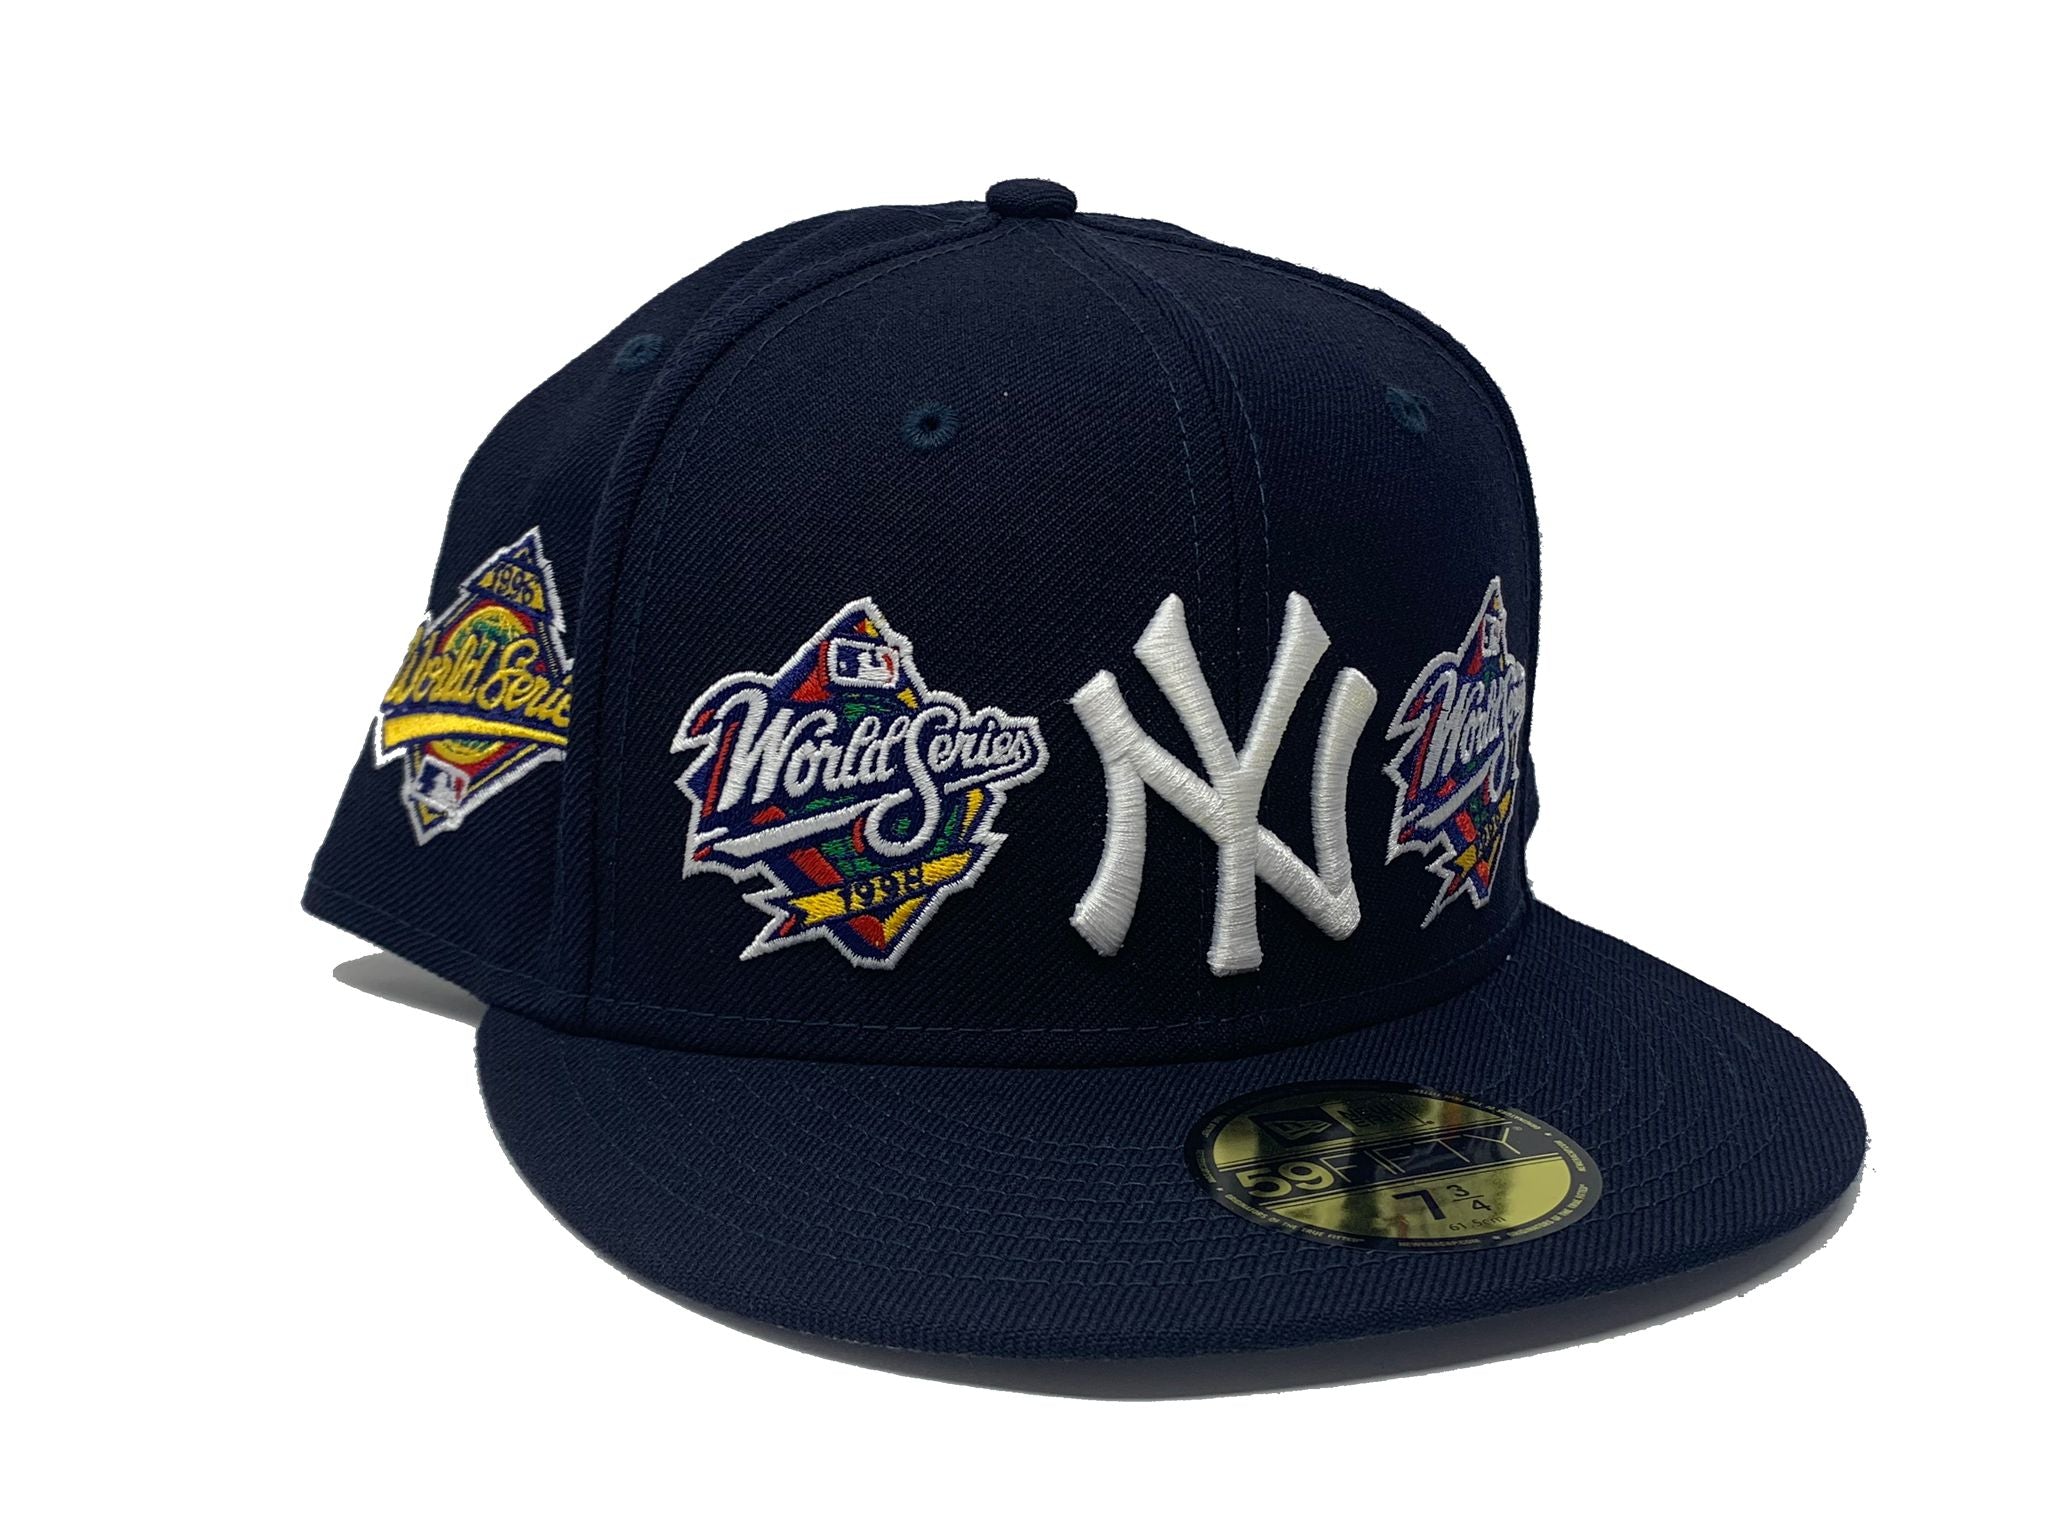 New Era 59Fifty New York Yankees World Champions Dark Navy Blue Limited  Edition Fitted Hat - Billion Creation